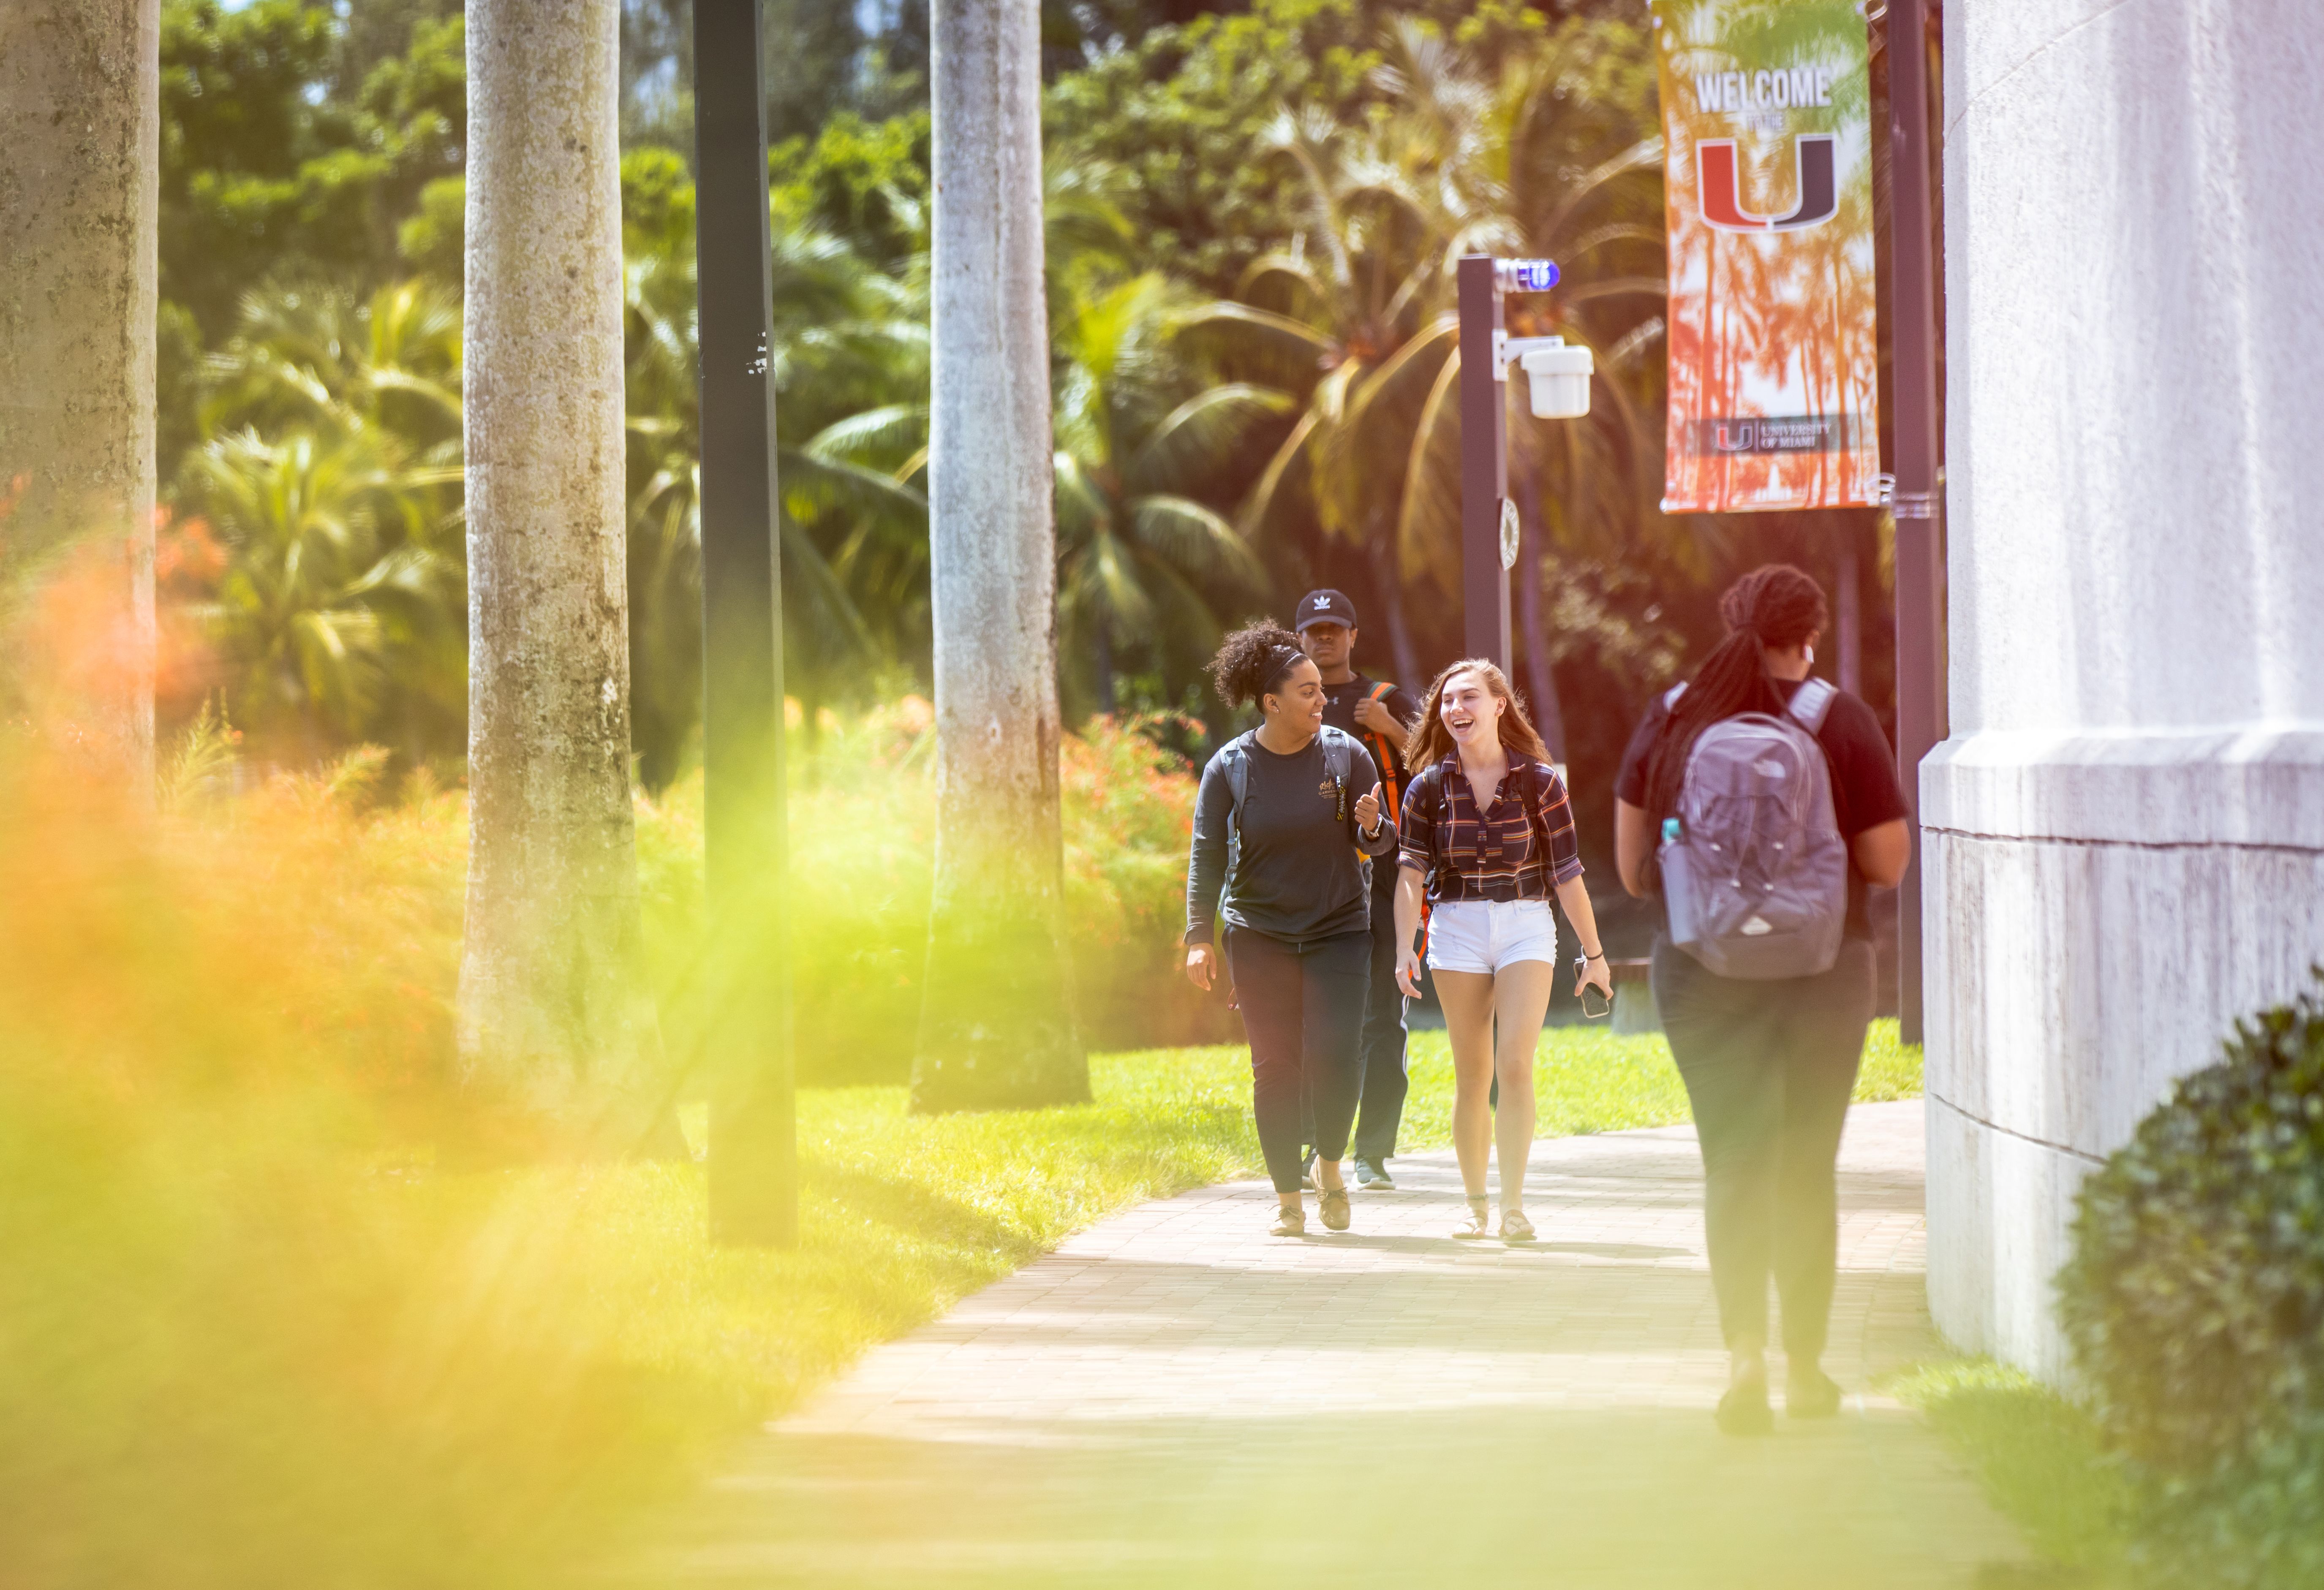 Students walking throughout the University of Miami campus.